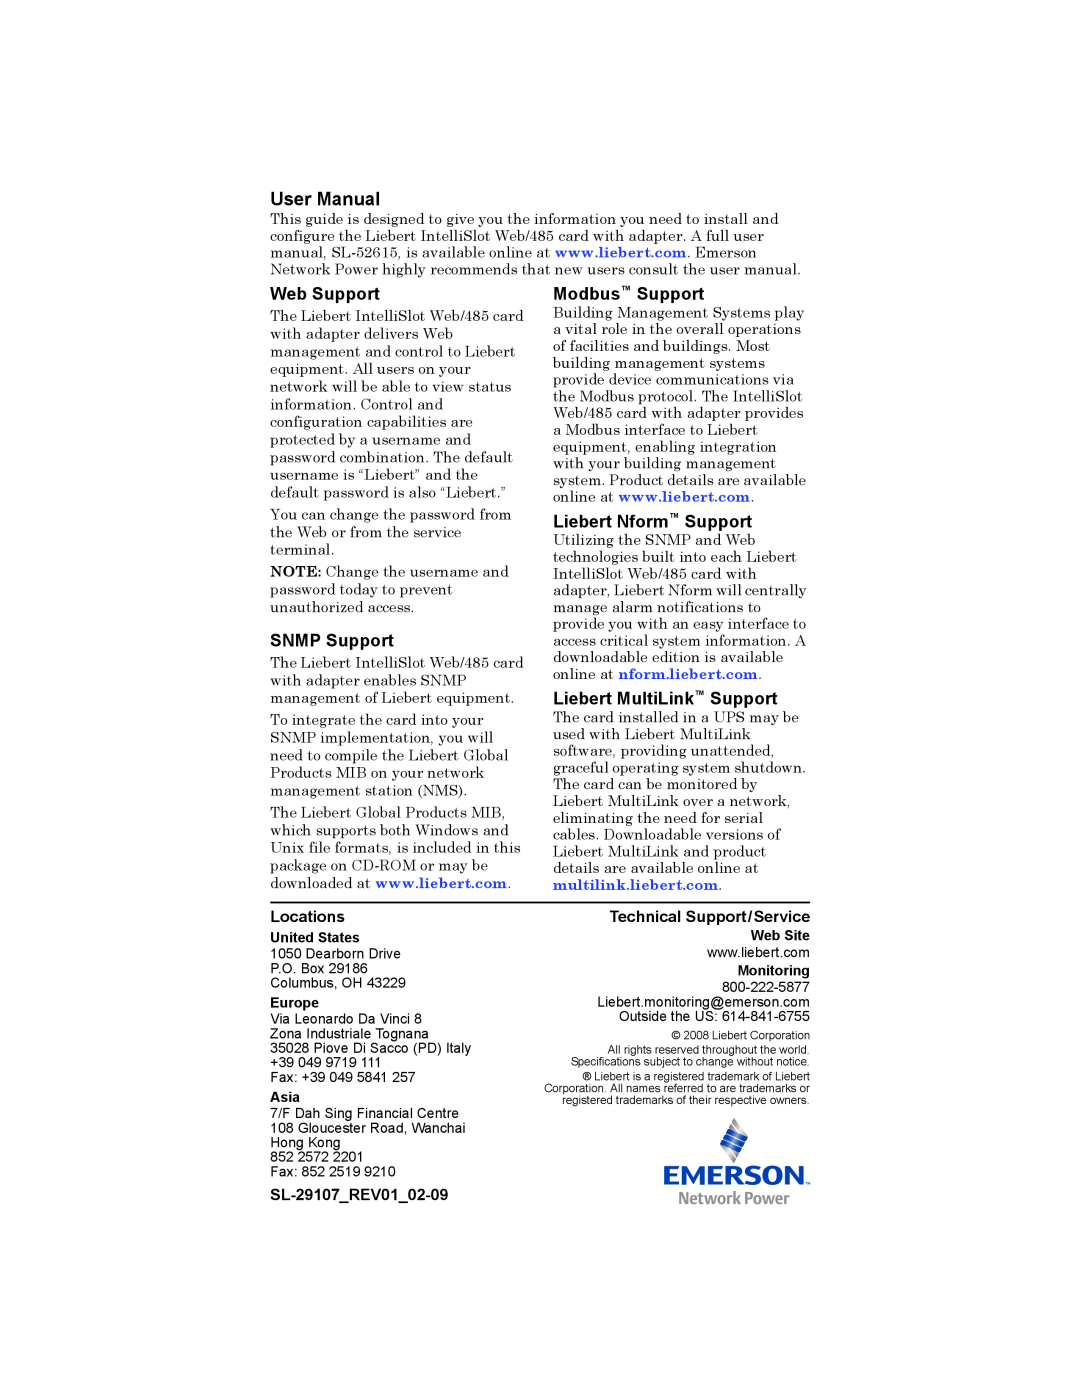 Emerson WEB/485 Web Support, SNMP Support, Modbus Support, Liebert Nform Support, Liebert MultiLink Support, Locations 